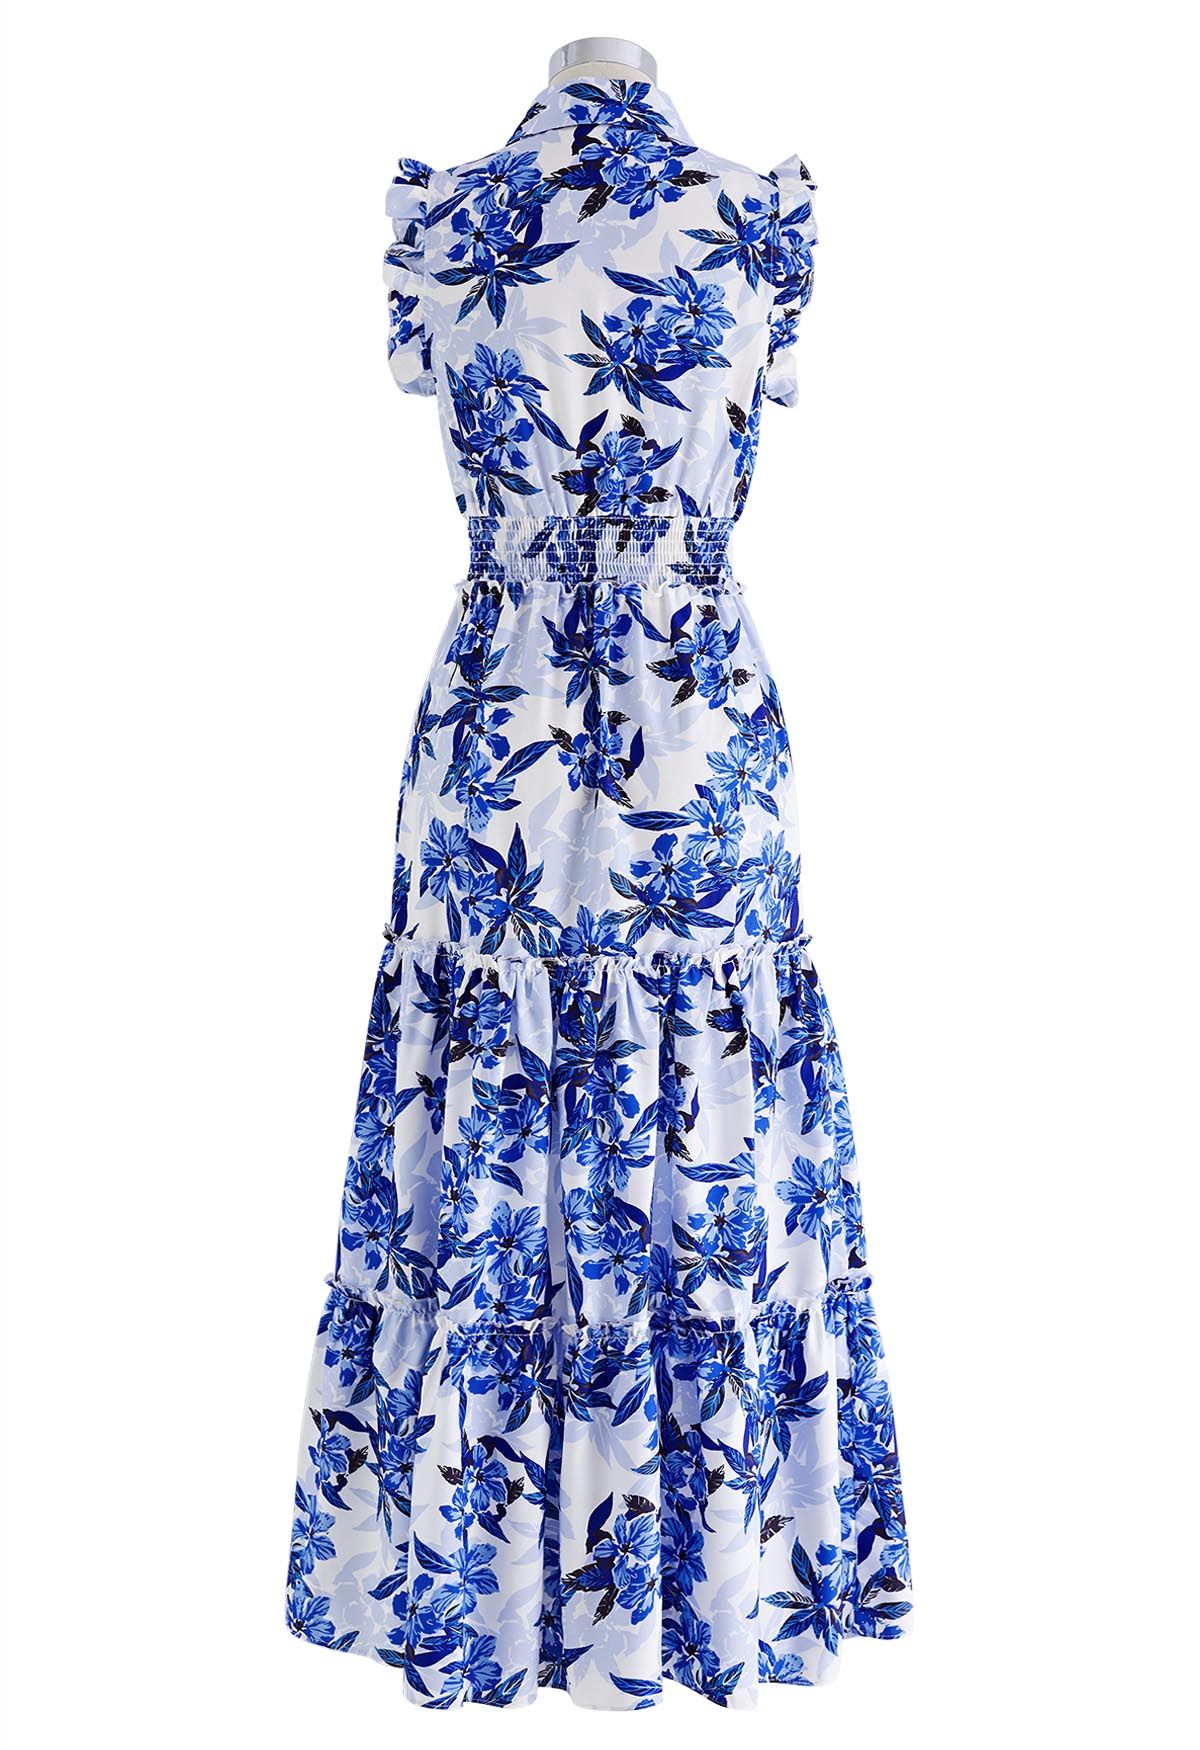 Blue Floral Collared Buttoned Sleeveless Dress